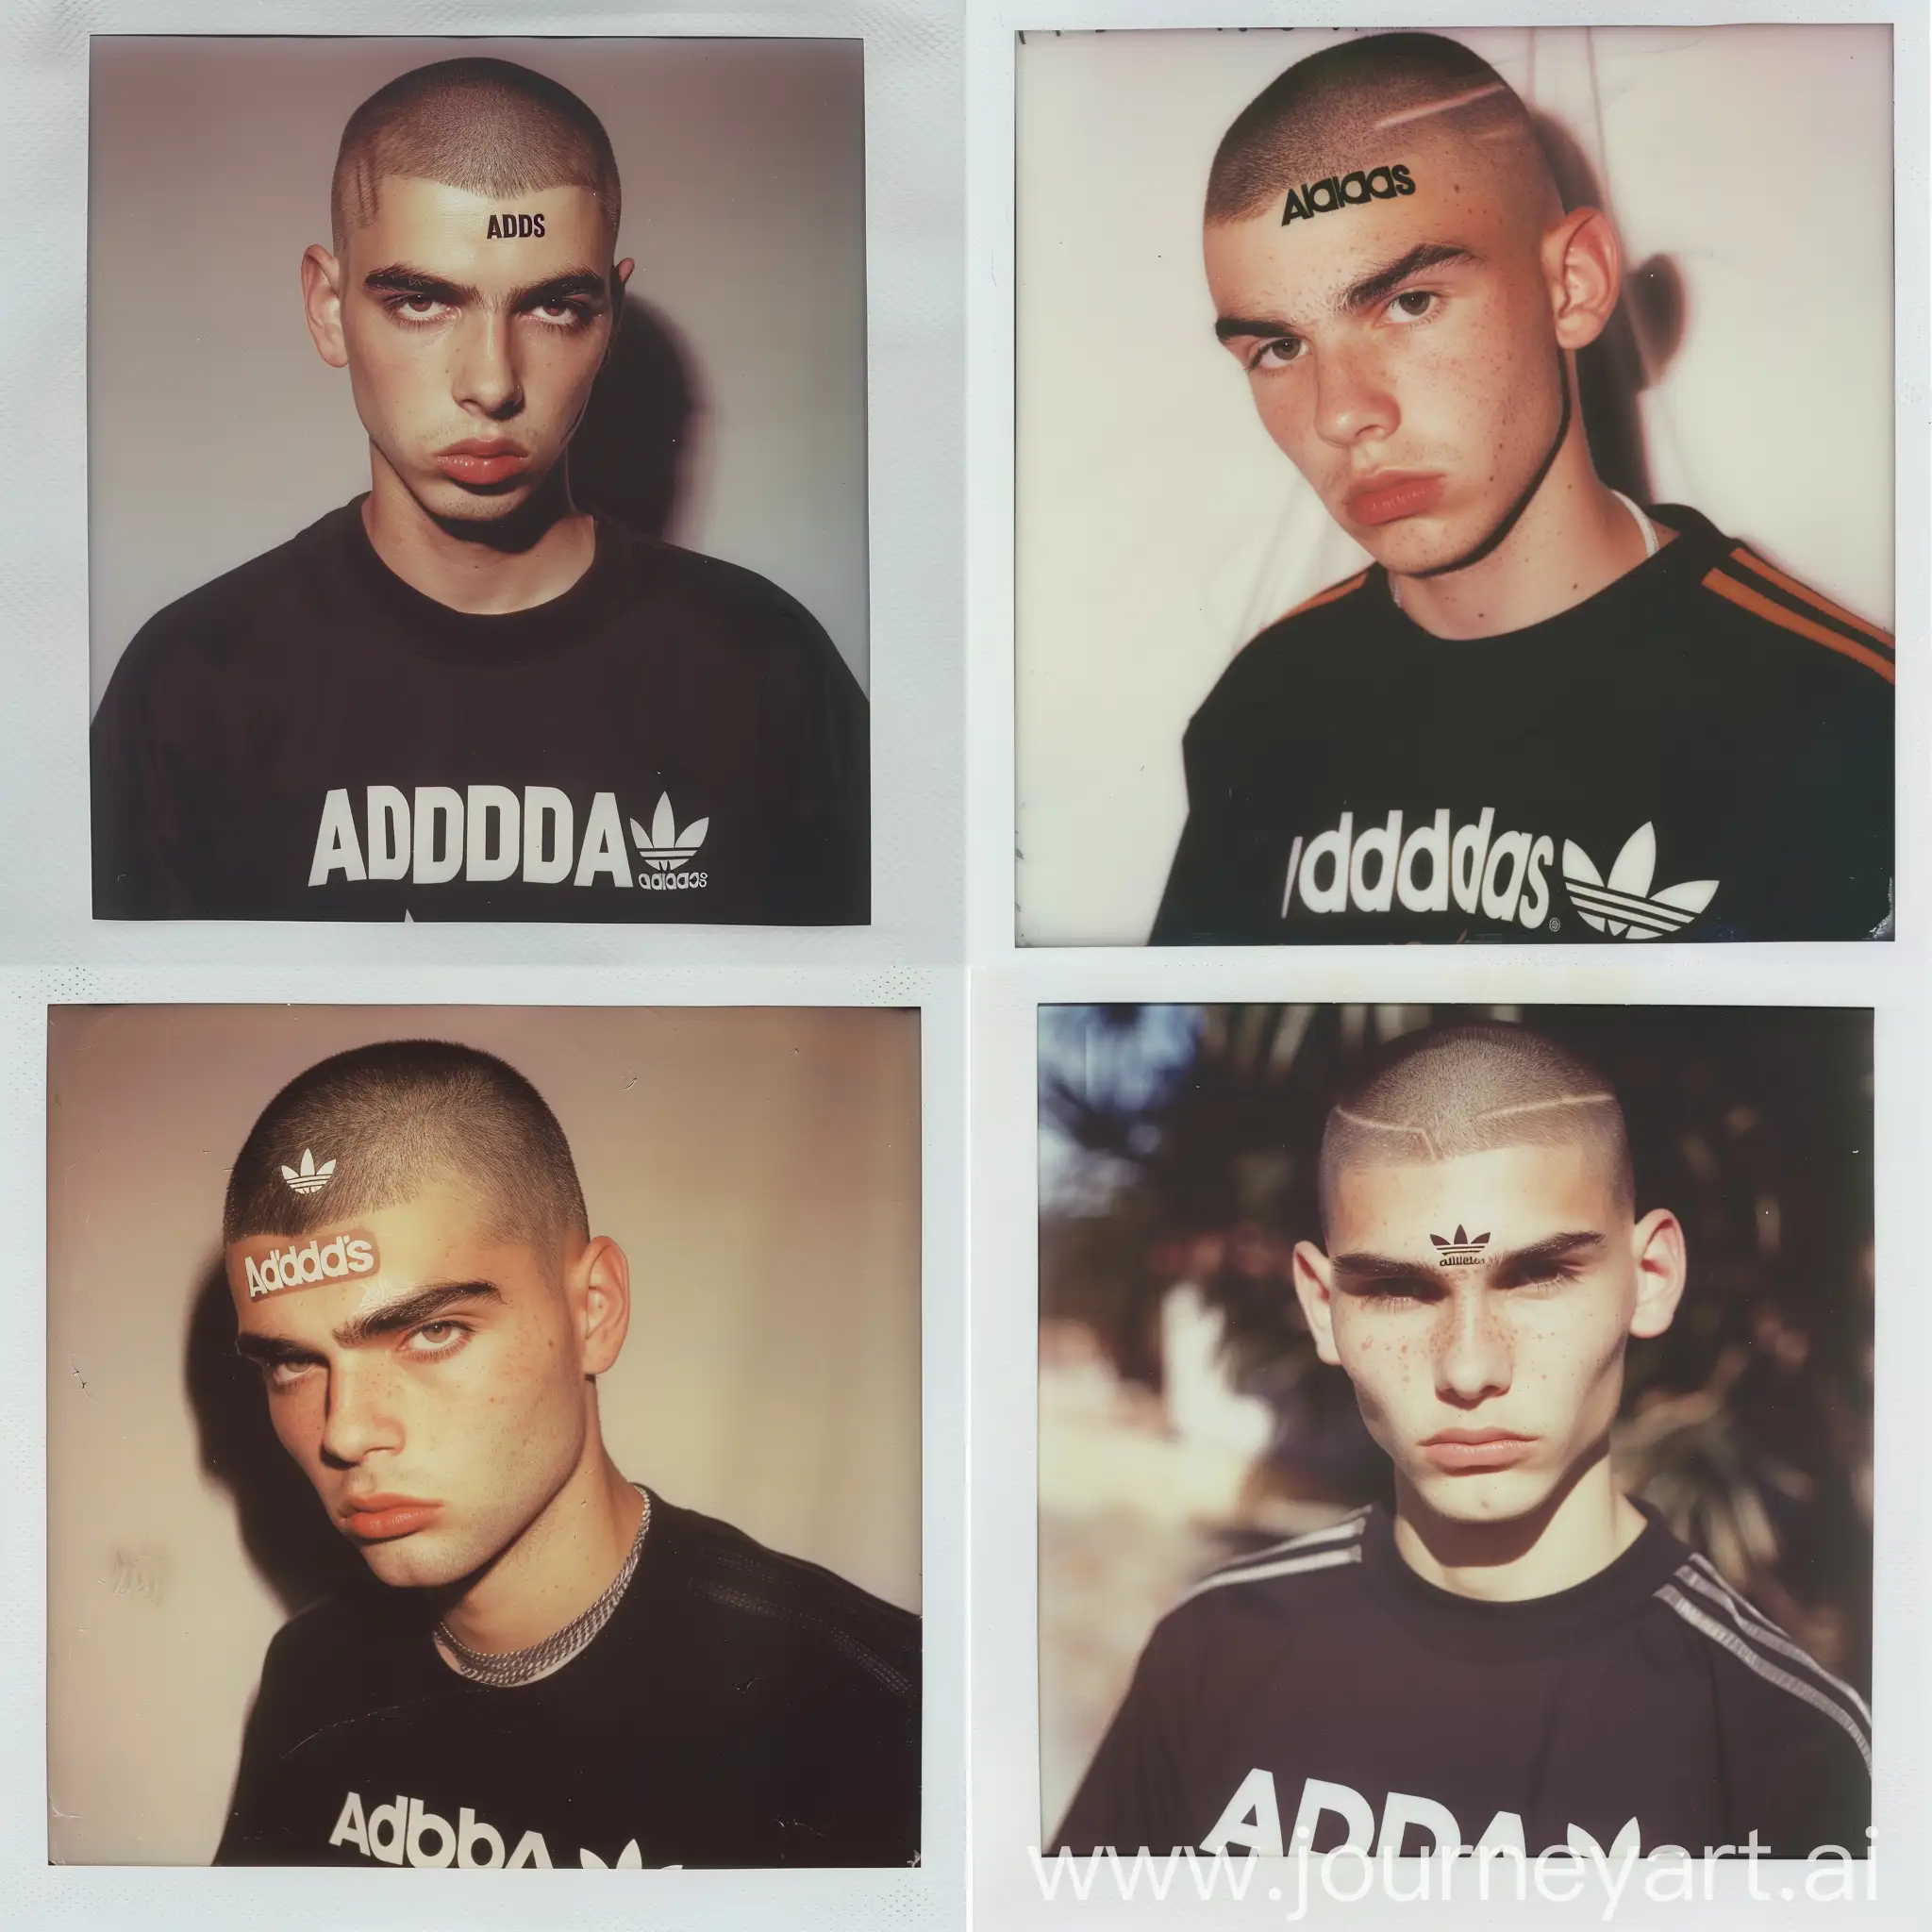 A young man with a shaved head with ADIDAS Logo hair on the forehead and a serious expression look, wearing a black shirt with the word "ADIDAS" printed on it in white letters, film photo, 90s, polaroid